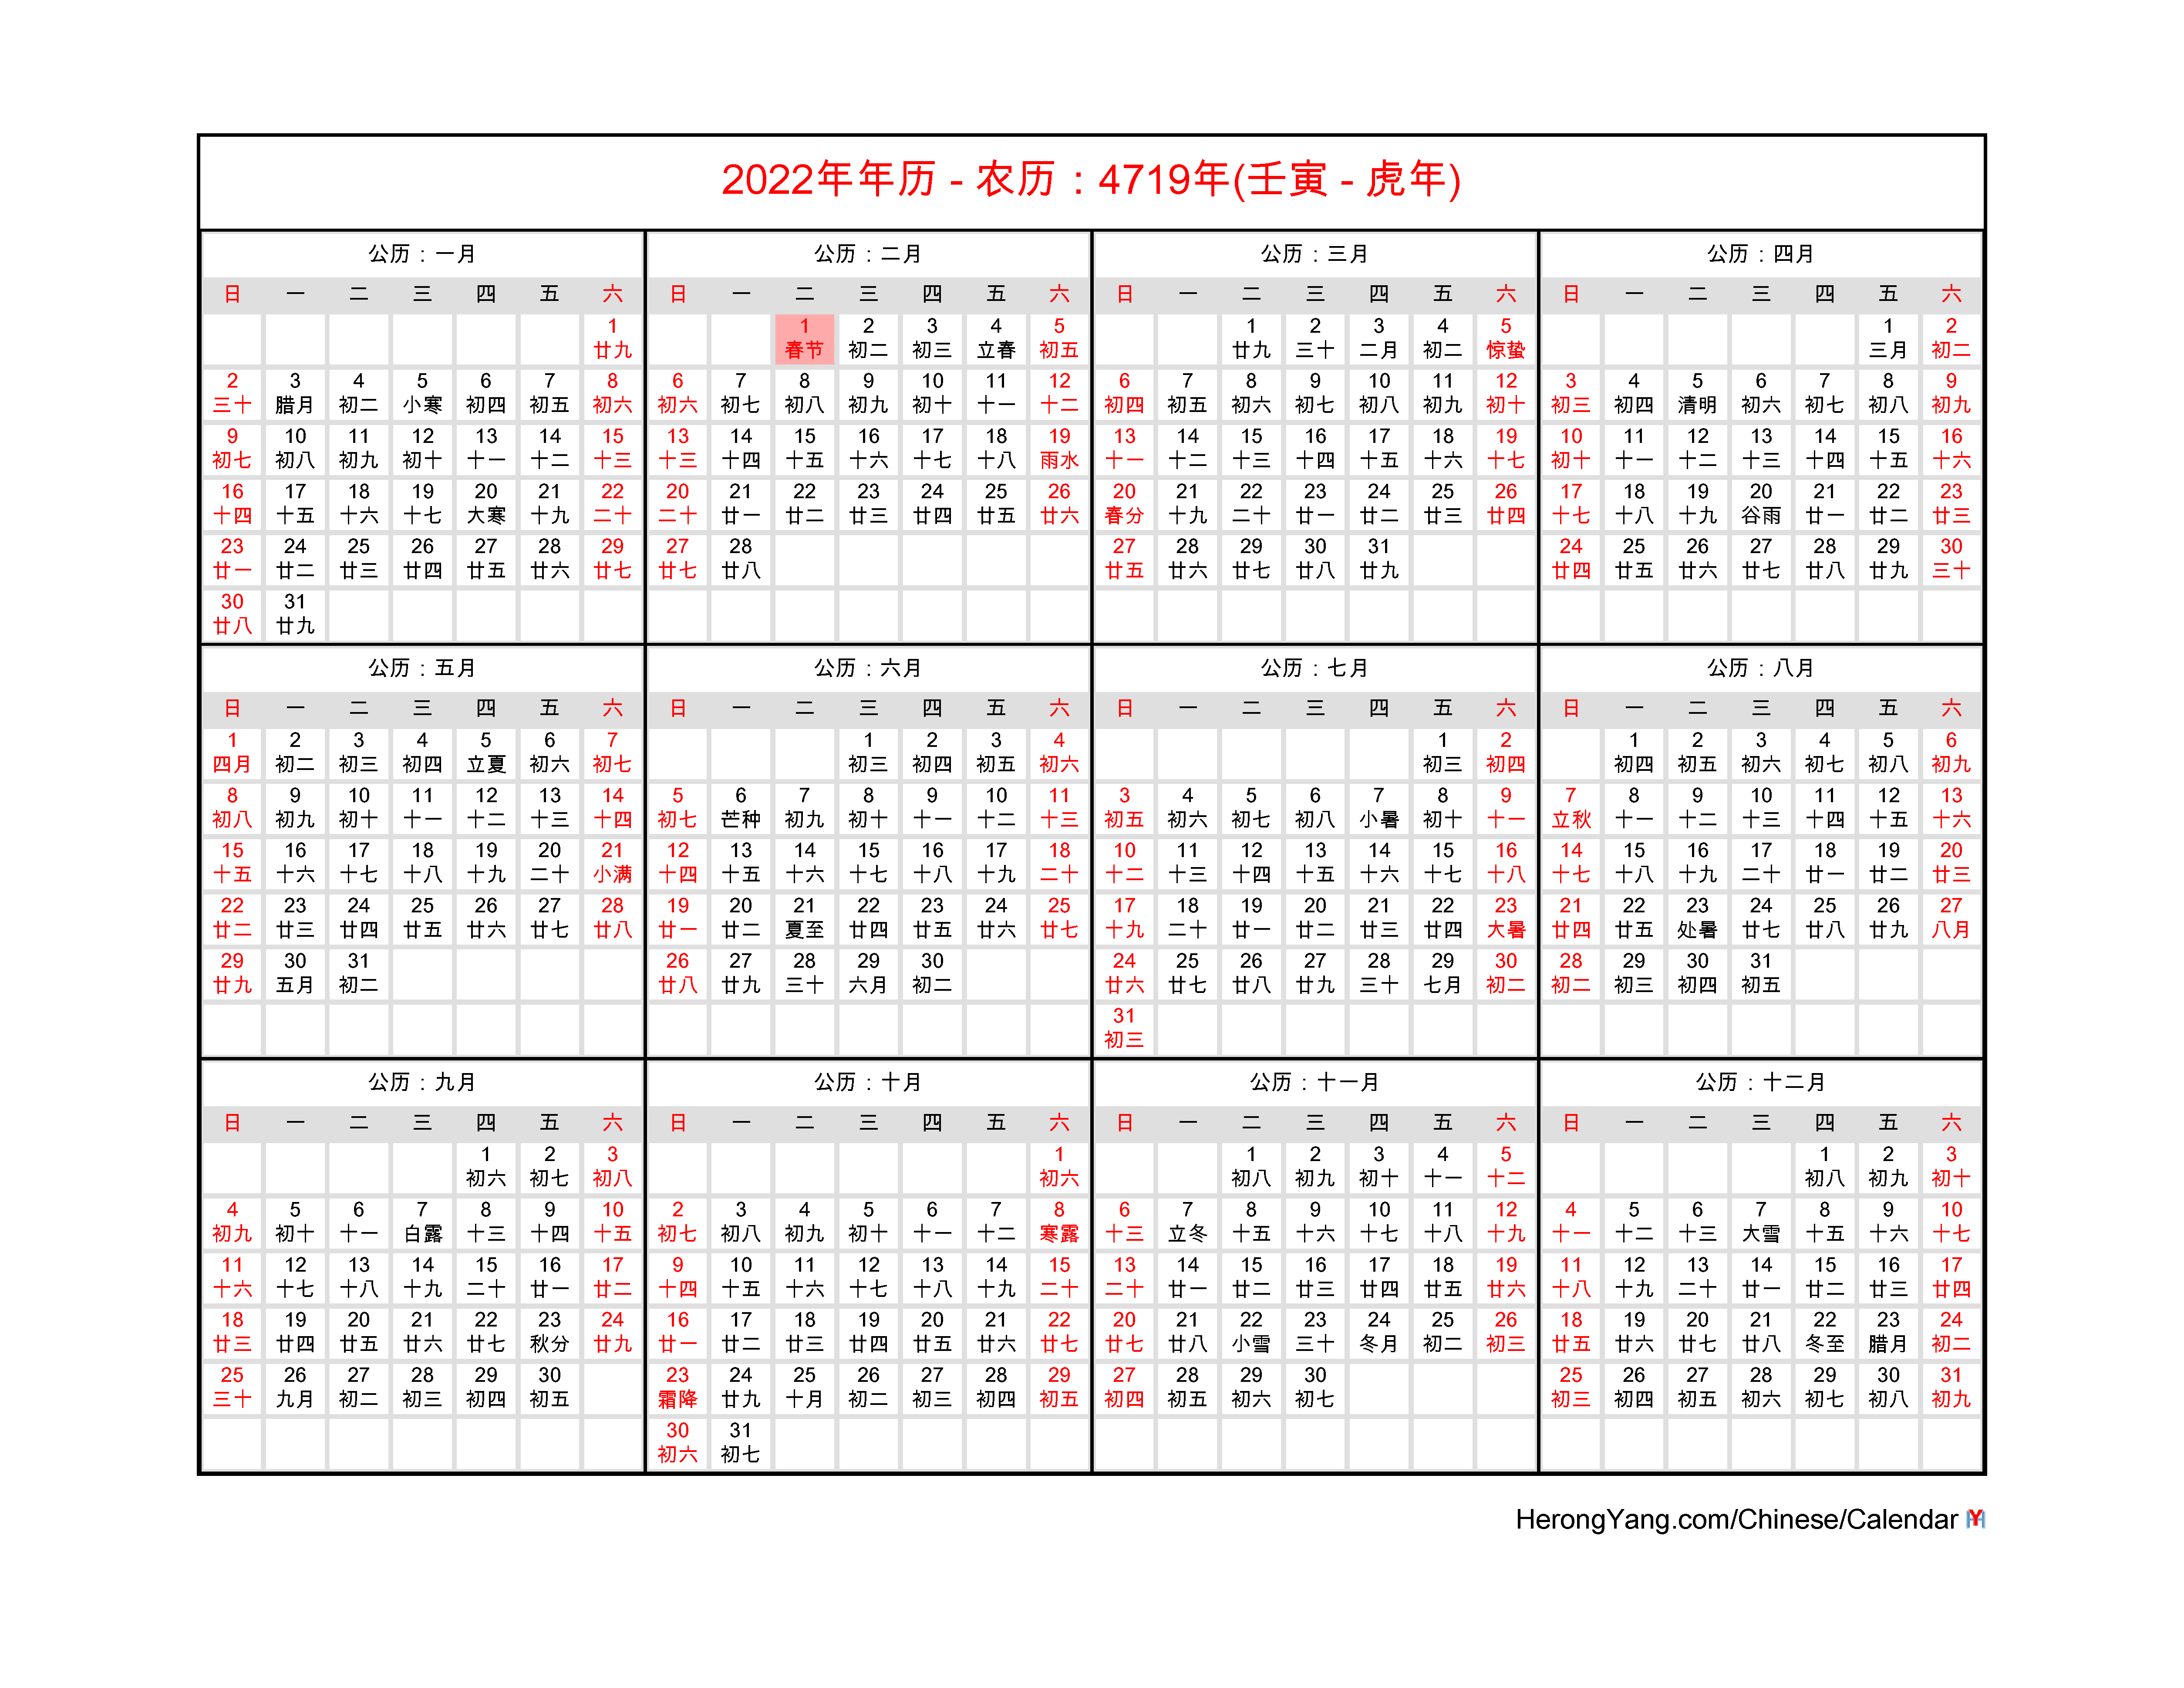 Free Chinese Calendar 2022 Year of the Tiger